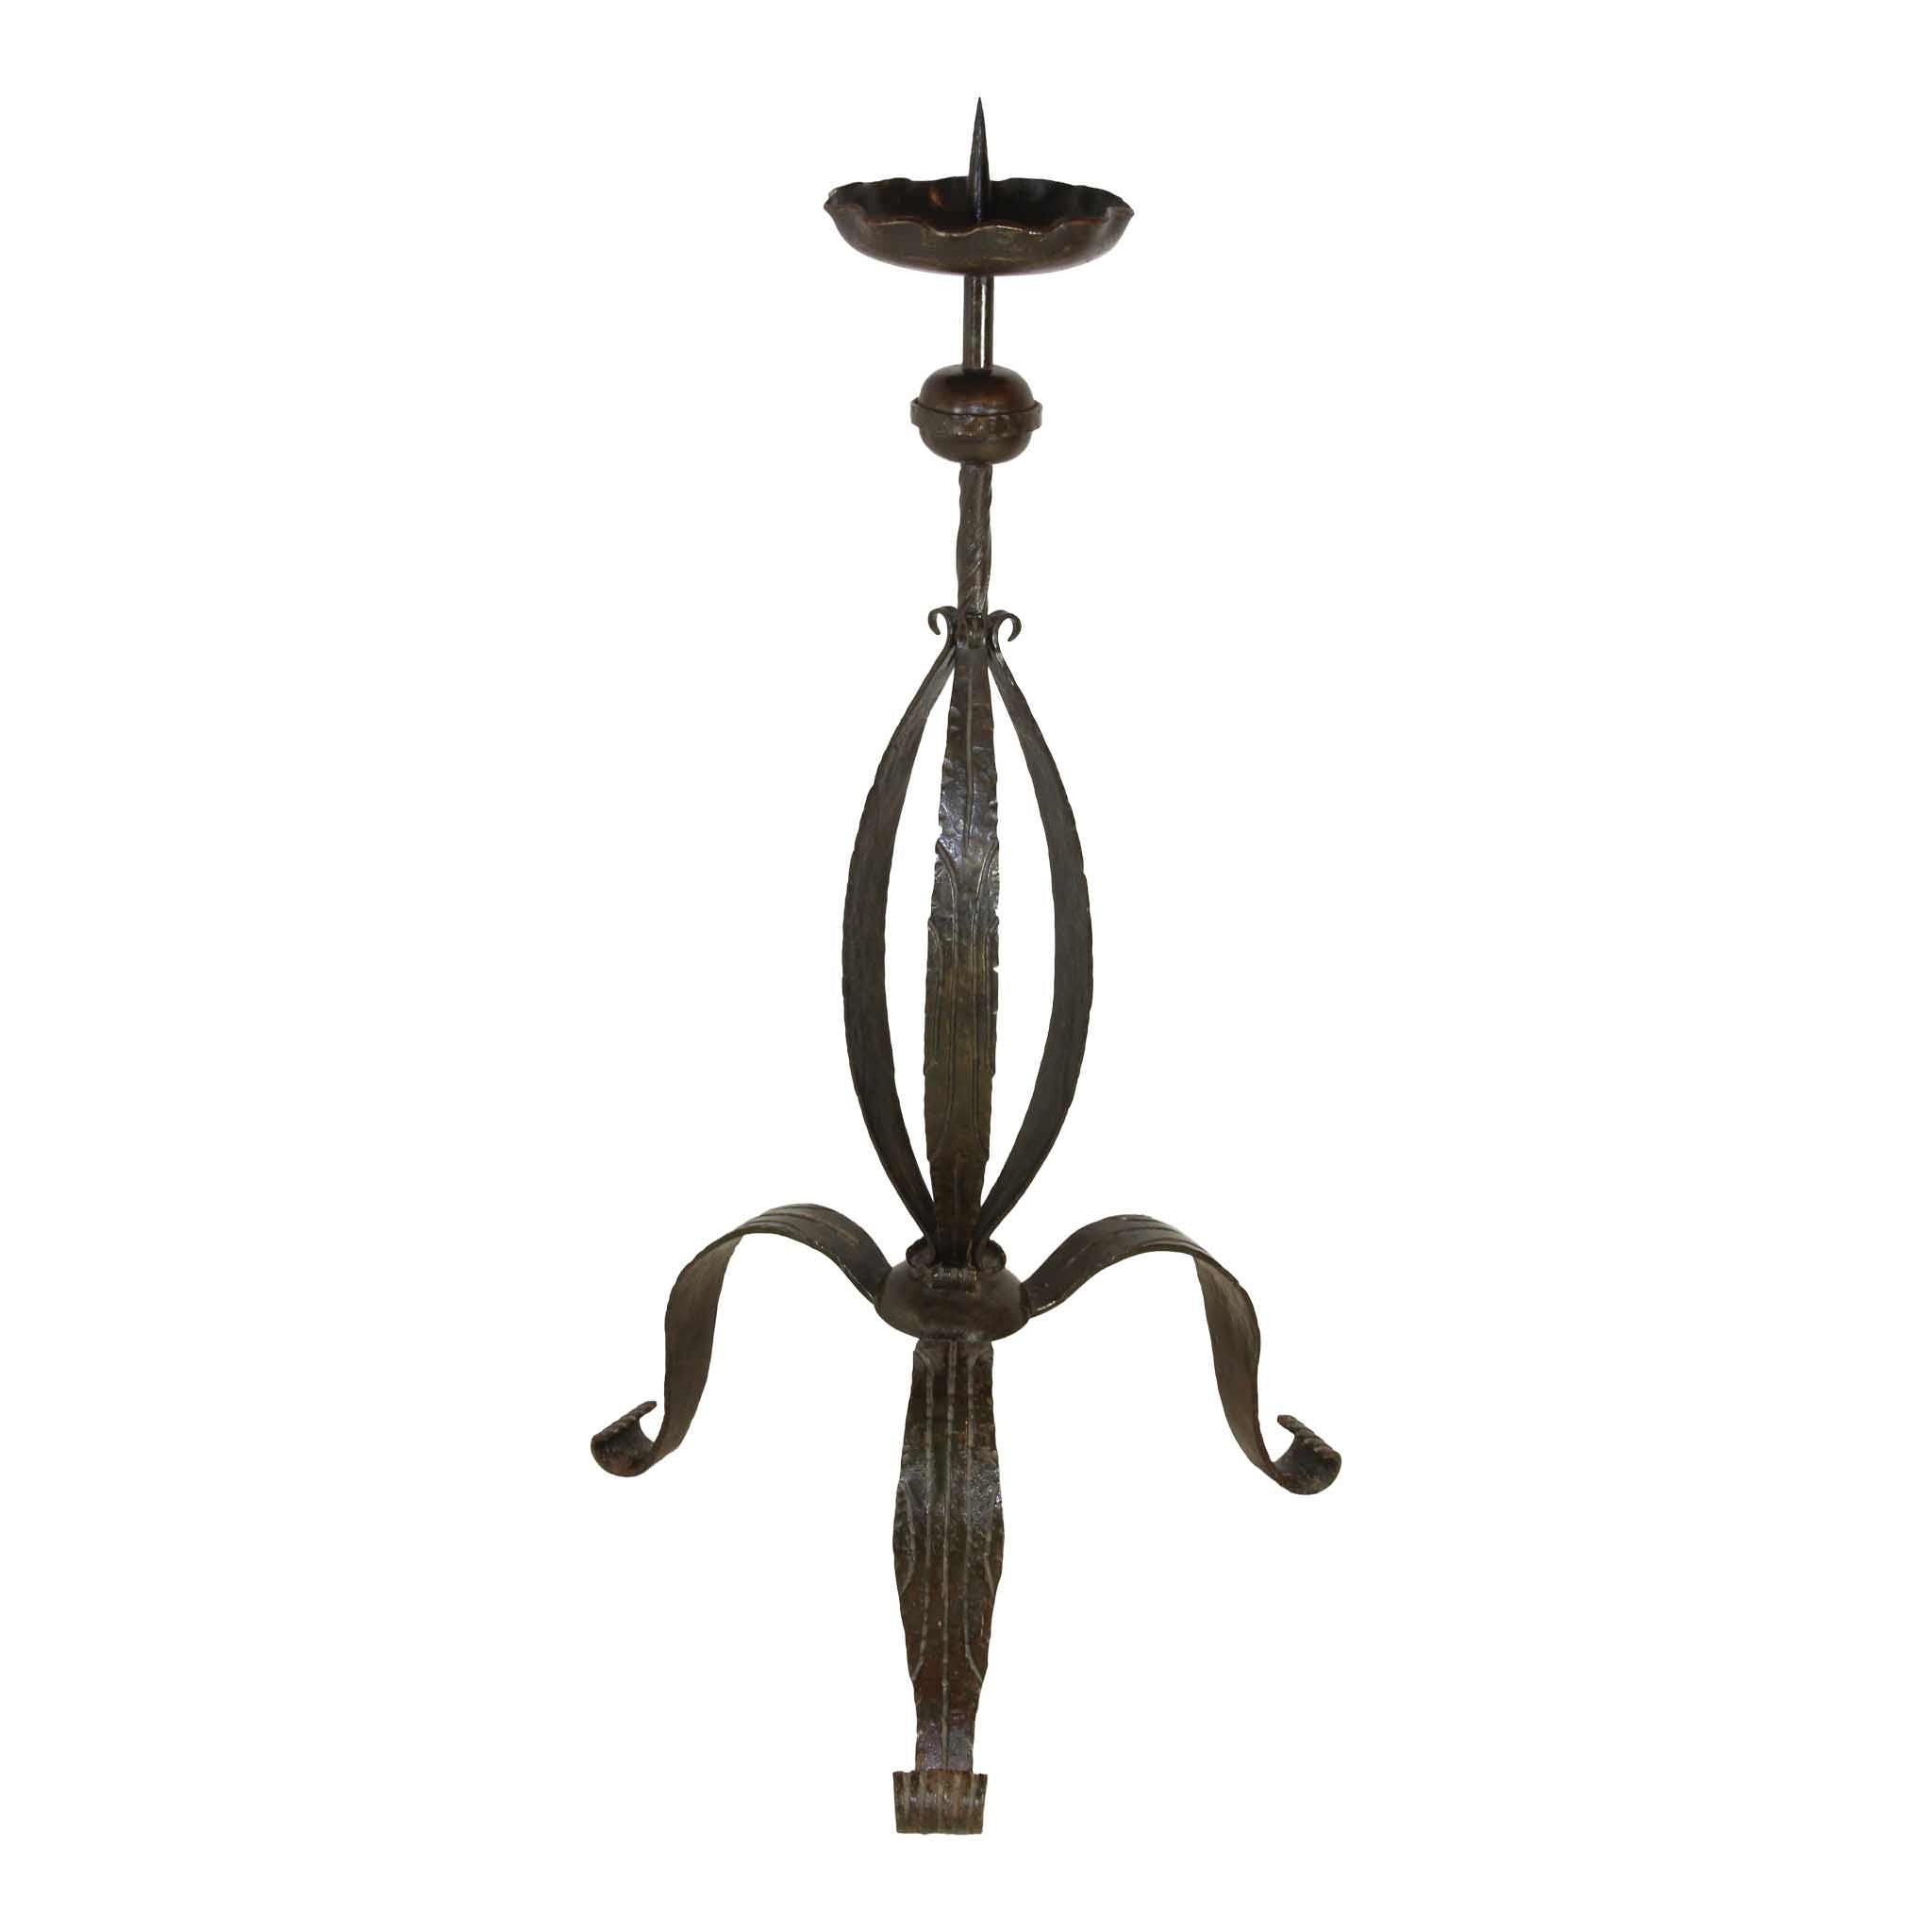 Large Iron Candlestand 4' in Height